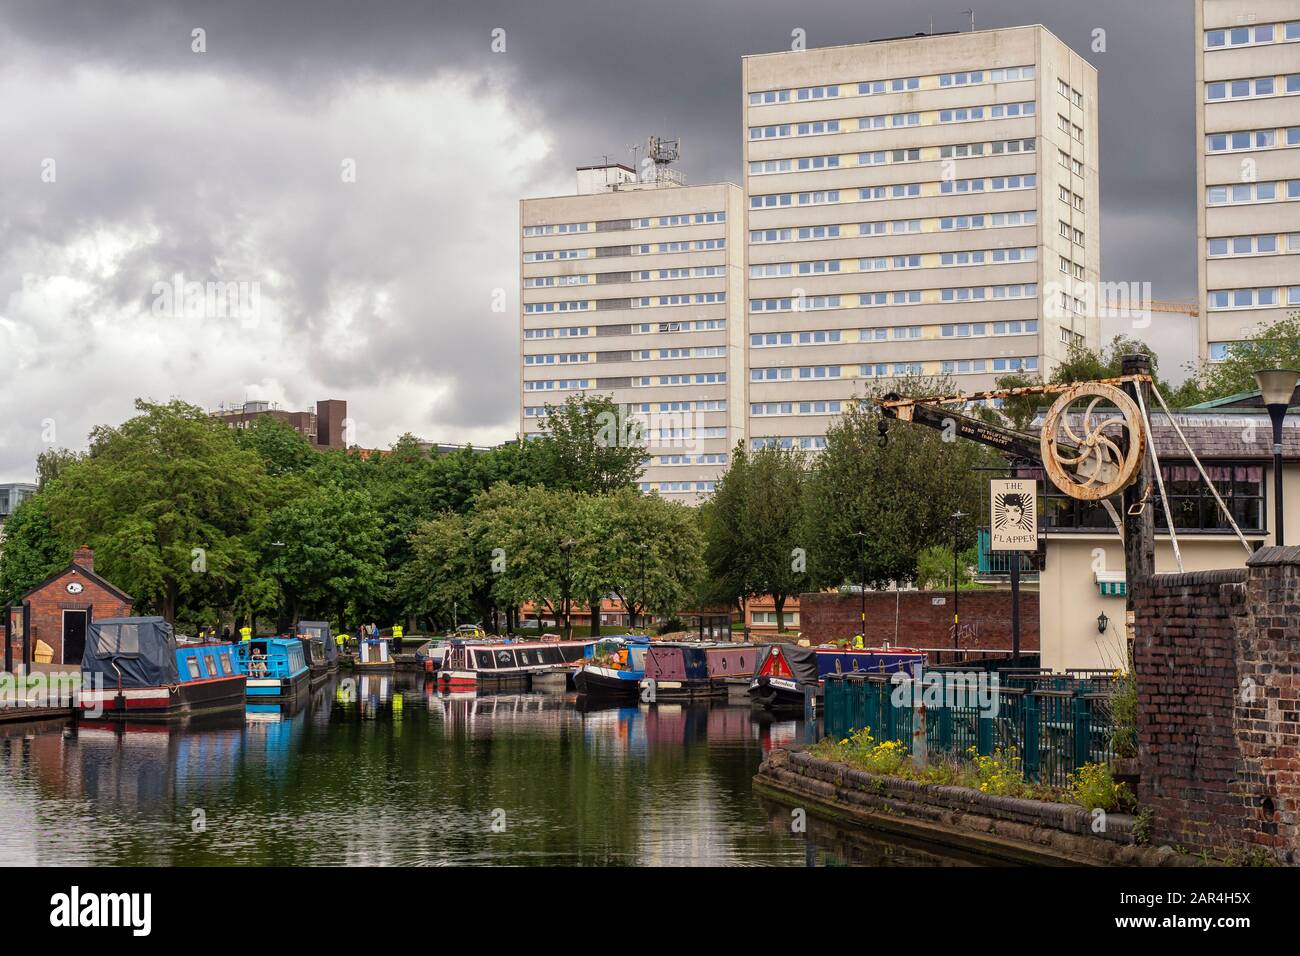 BIRMINGHAM, UK - MAY 28, 2019: View of Canal overlooked by apartment buildings Stock Photo